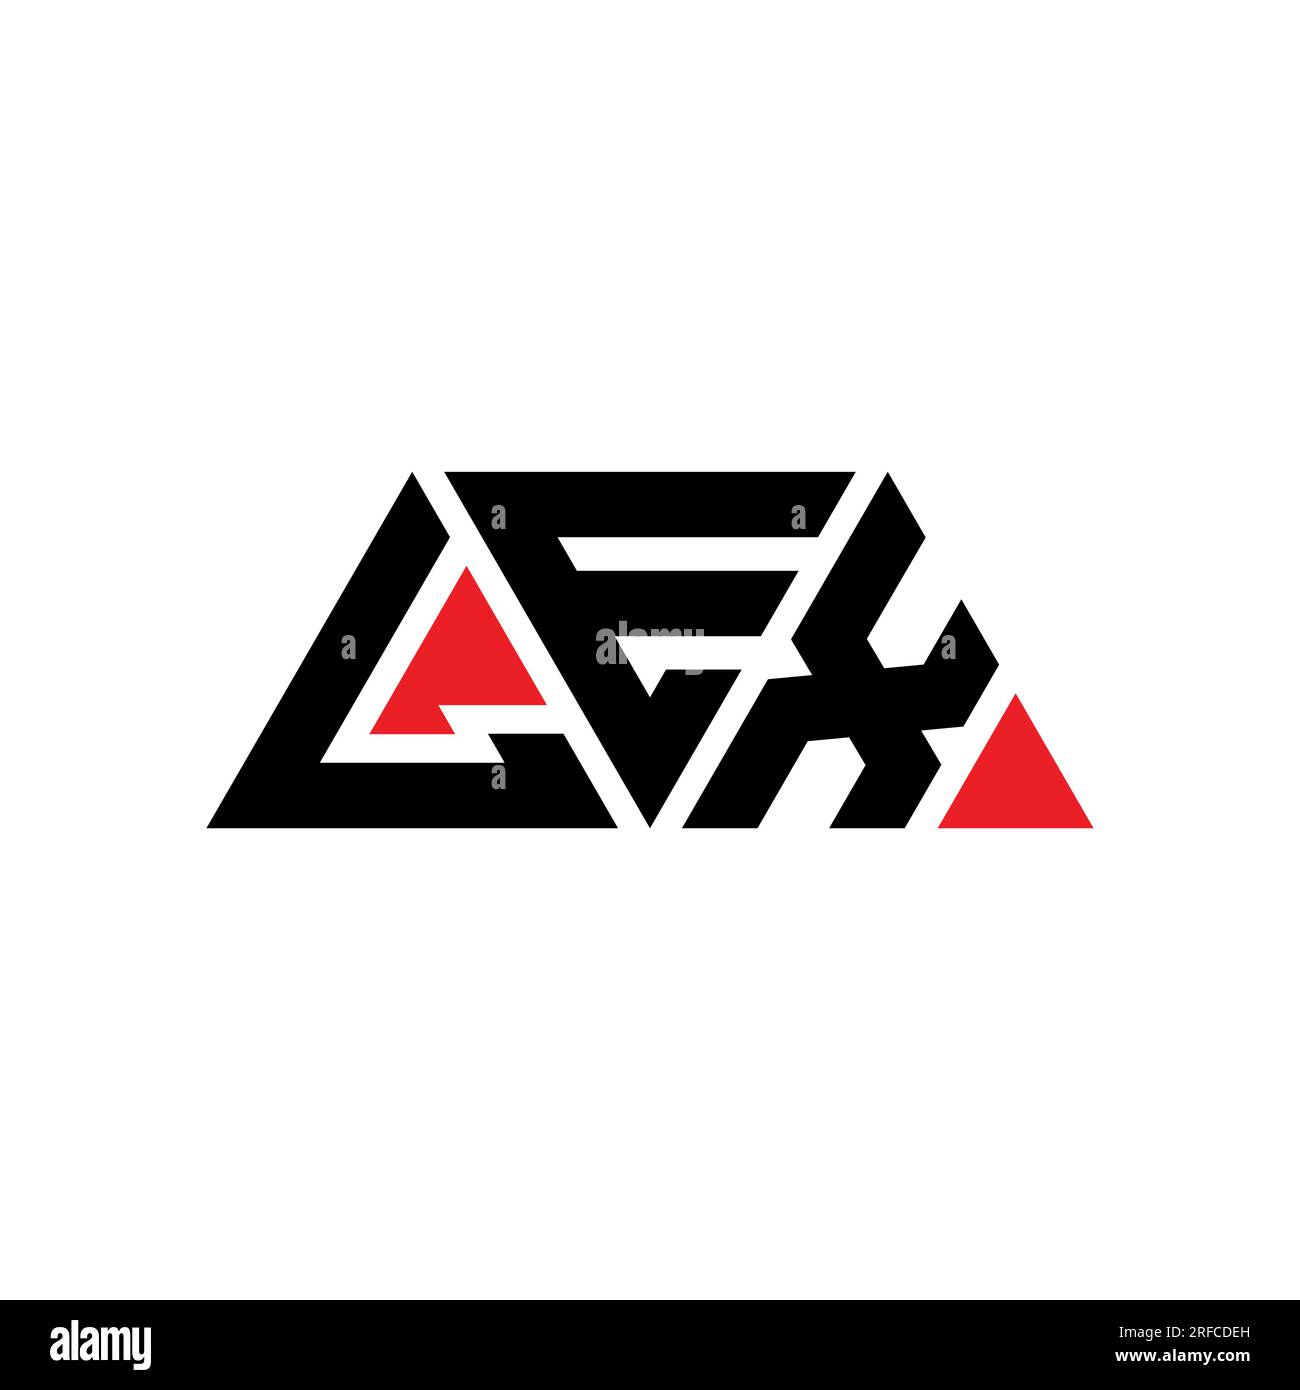 https://c8.alamy.com/comp/2RFCDEH/lex-triangle-letter-logo-design-with-triangle-shape-lex-triangle-logo-design-monogram-lex-triangle-vector-logo-template-with-red-color-lex-triangul-2RFCDEH.jpg